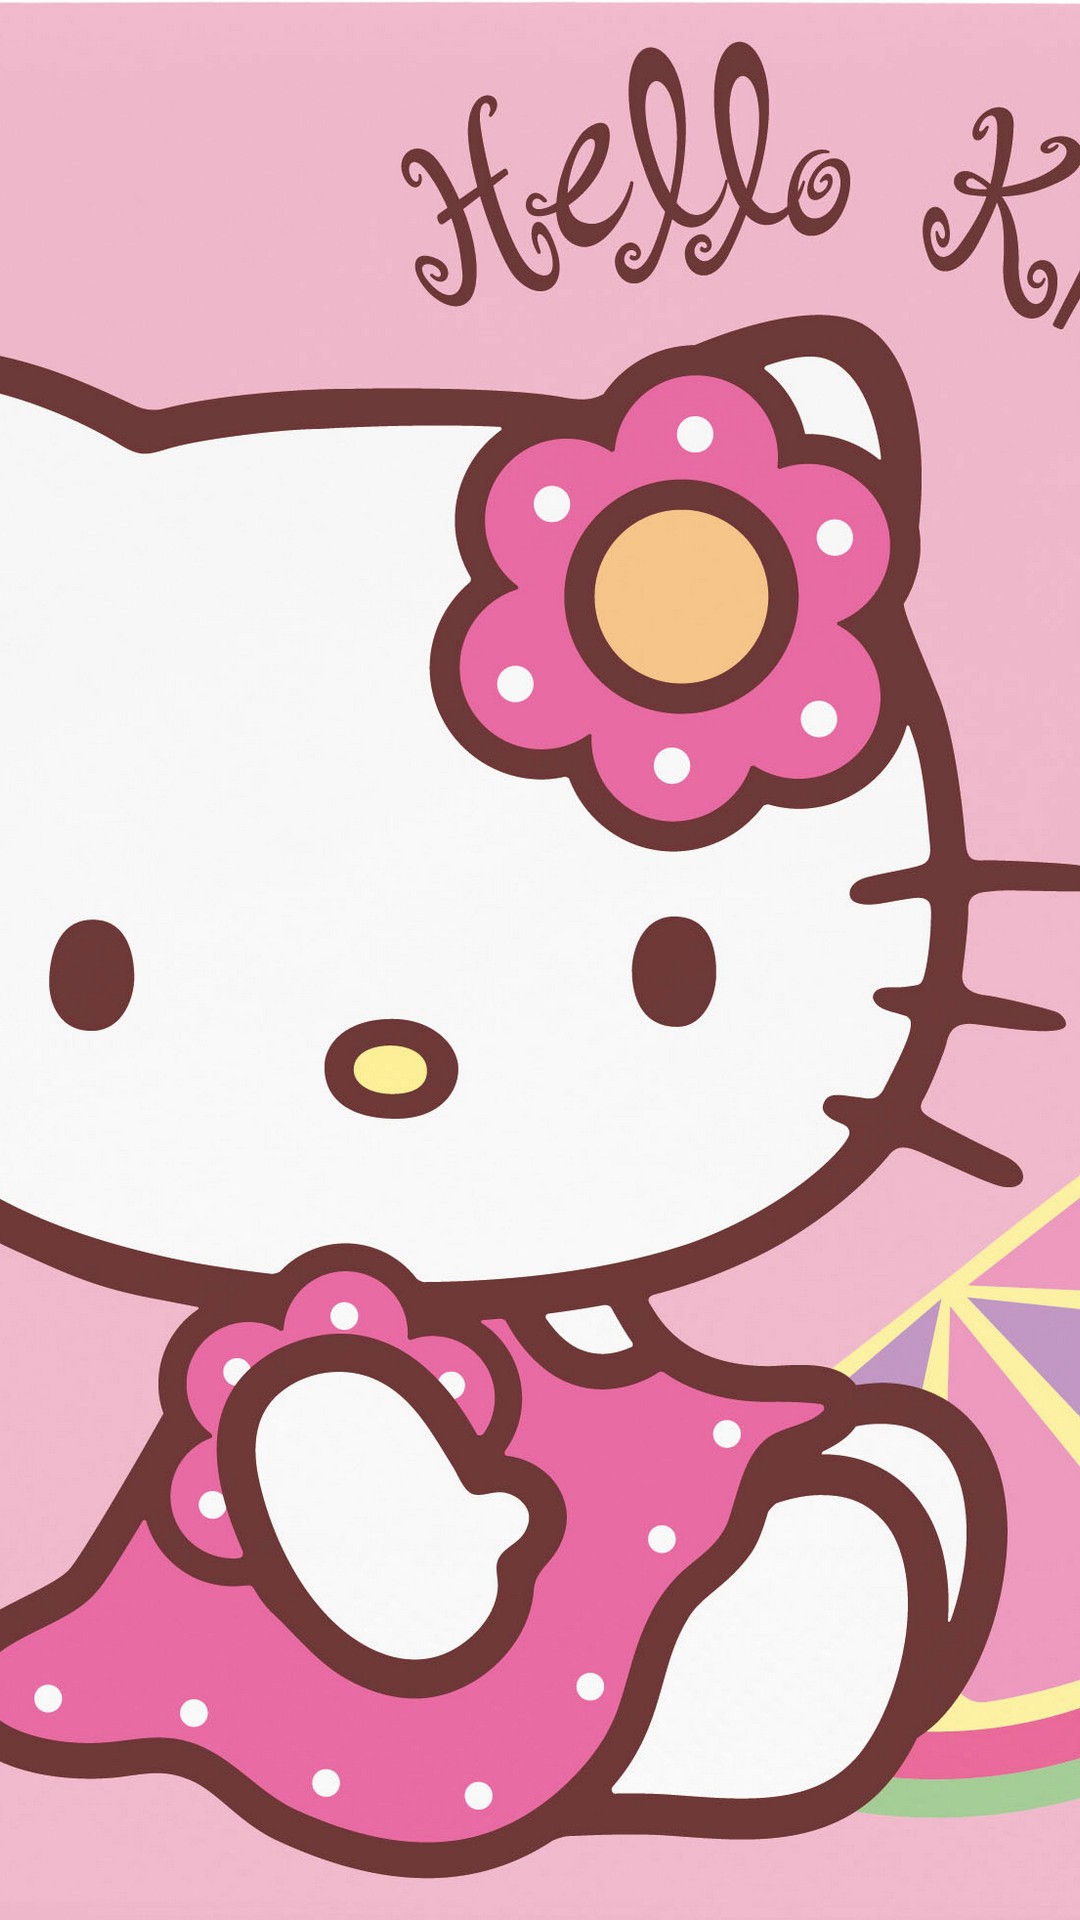 Sanrio Hello Kitty Android Wallpaper with resolution 1080X1920 pixel. You can make this wallpaper for your Android backgrounds, Tablet, Smartphones Screensavers and Mobile Phone Lock Screen